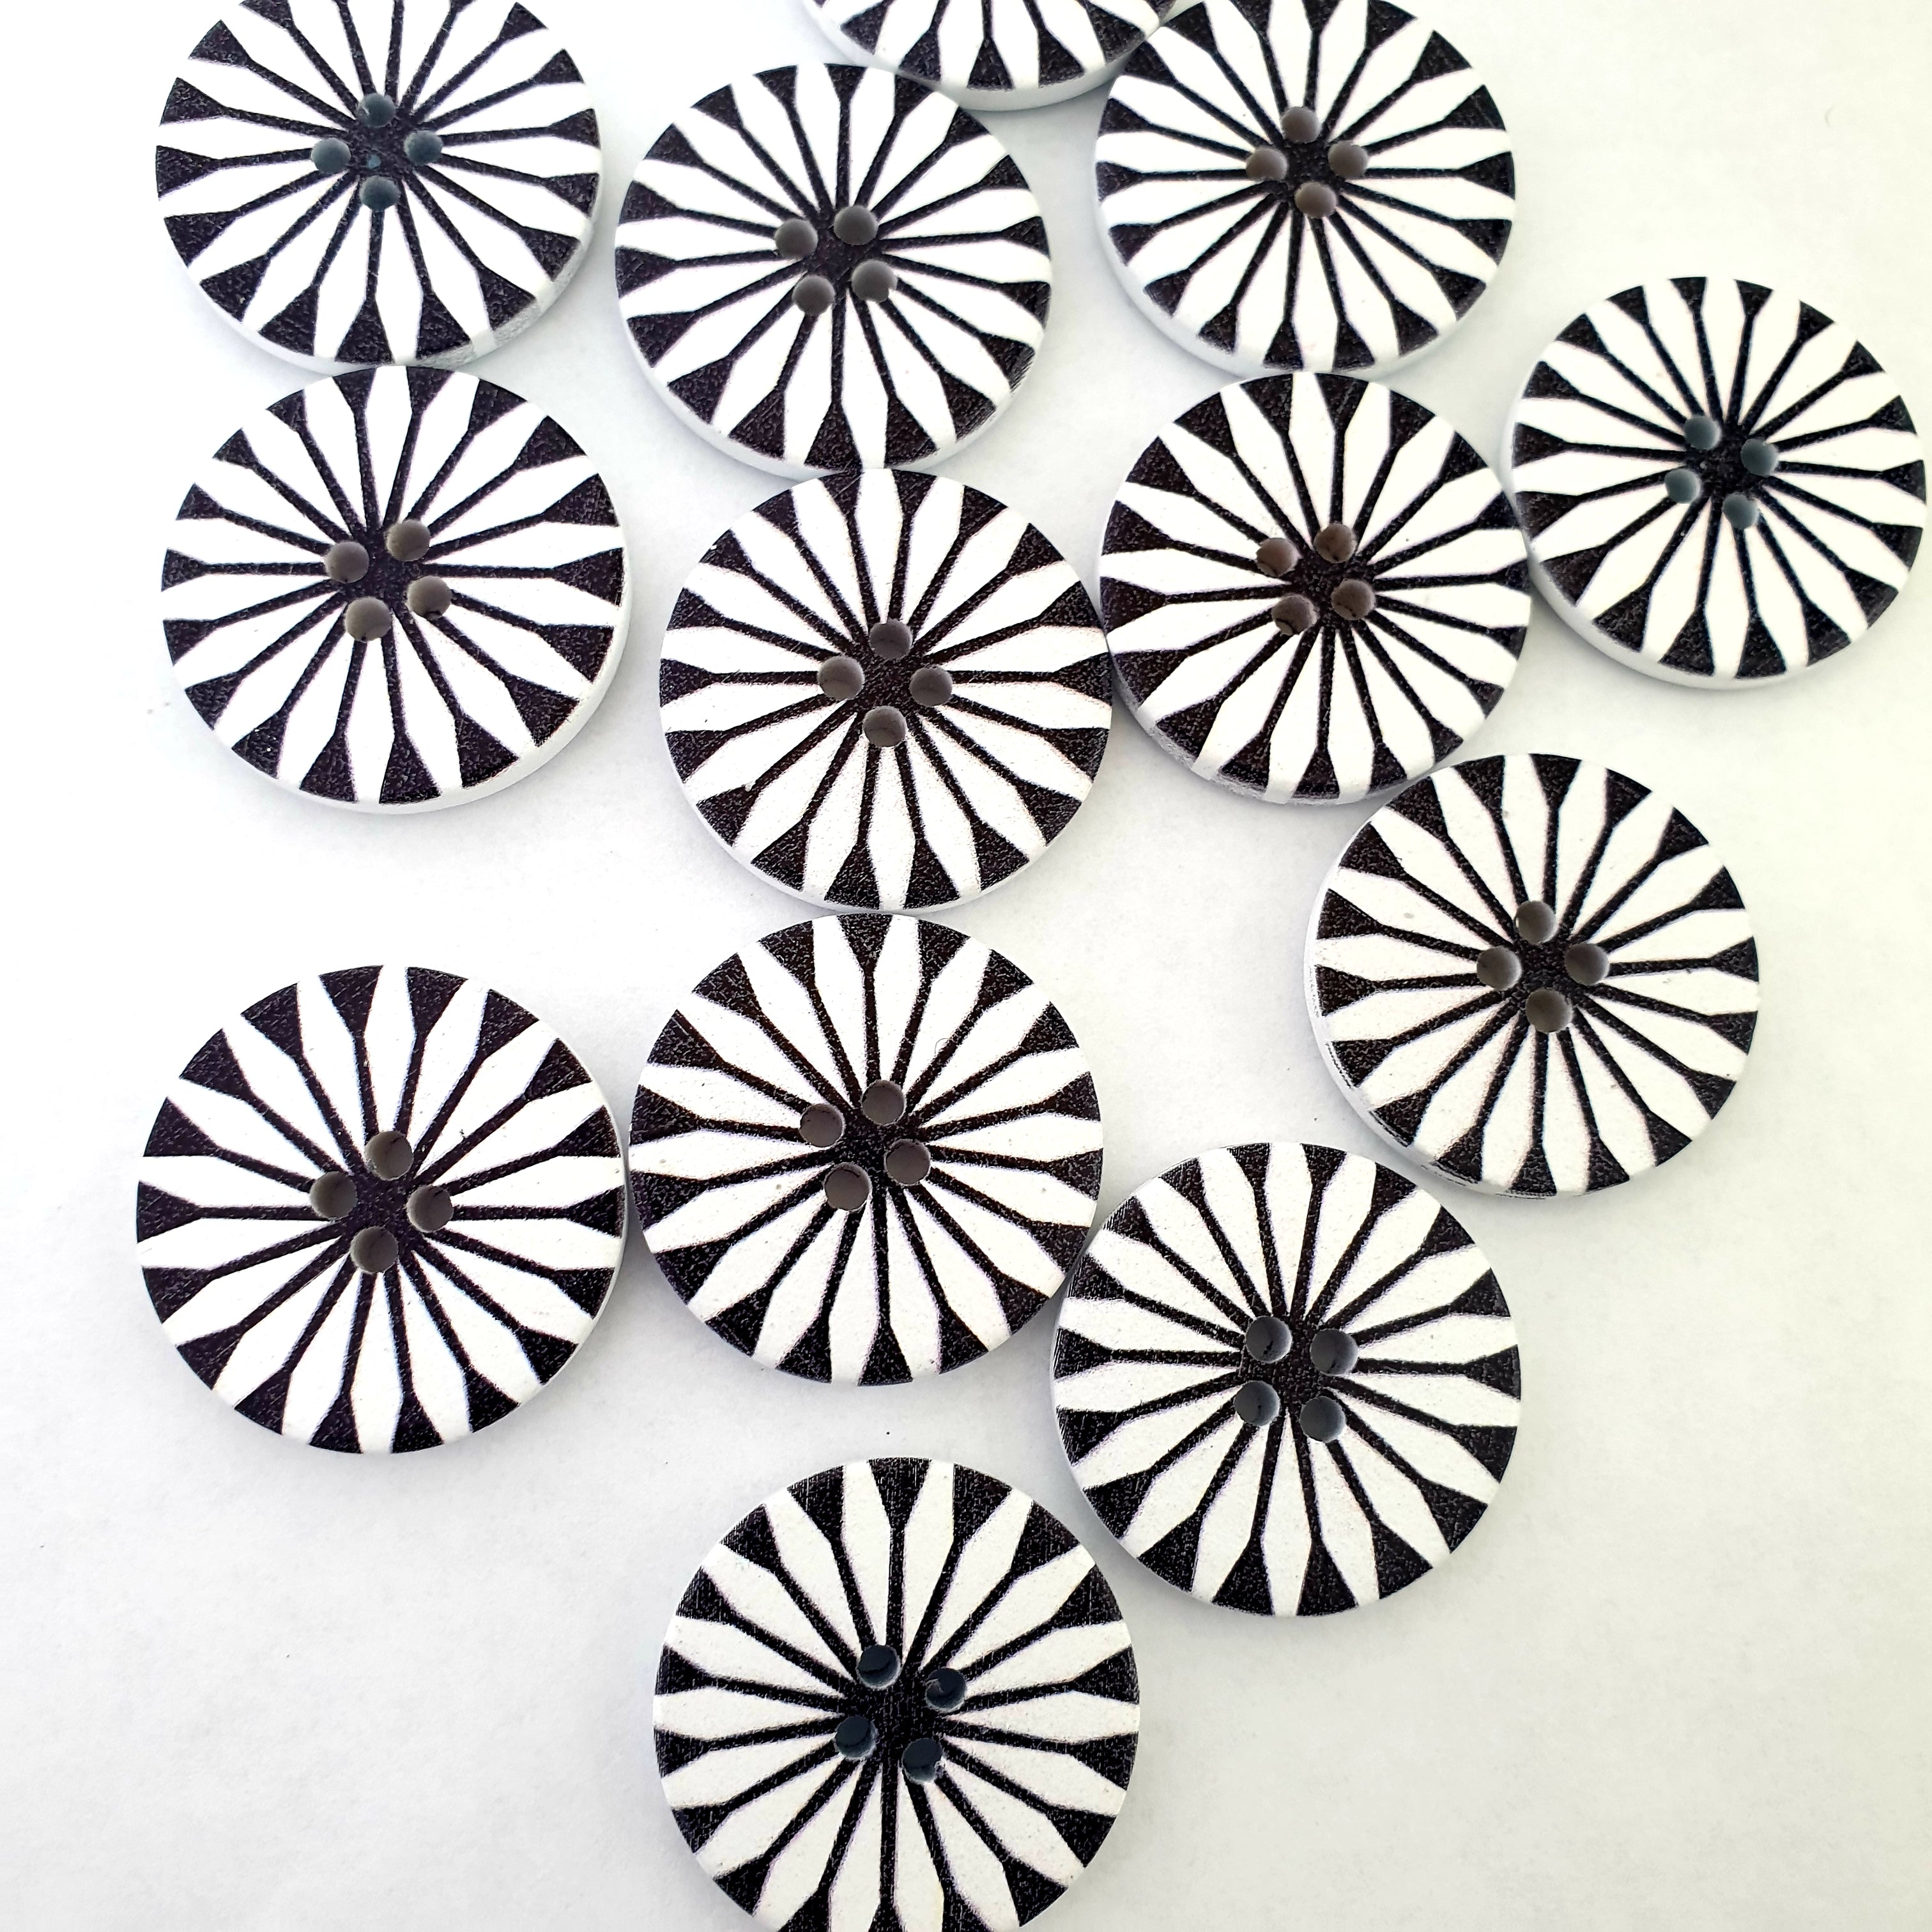 MajorCrafts 10pcs 30mm Black & White Flower 4 Holes Large Wooden Sewing Buttons